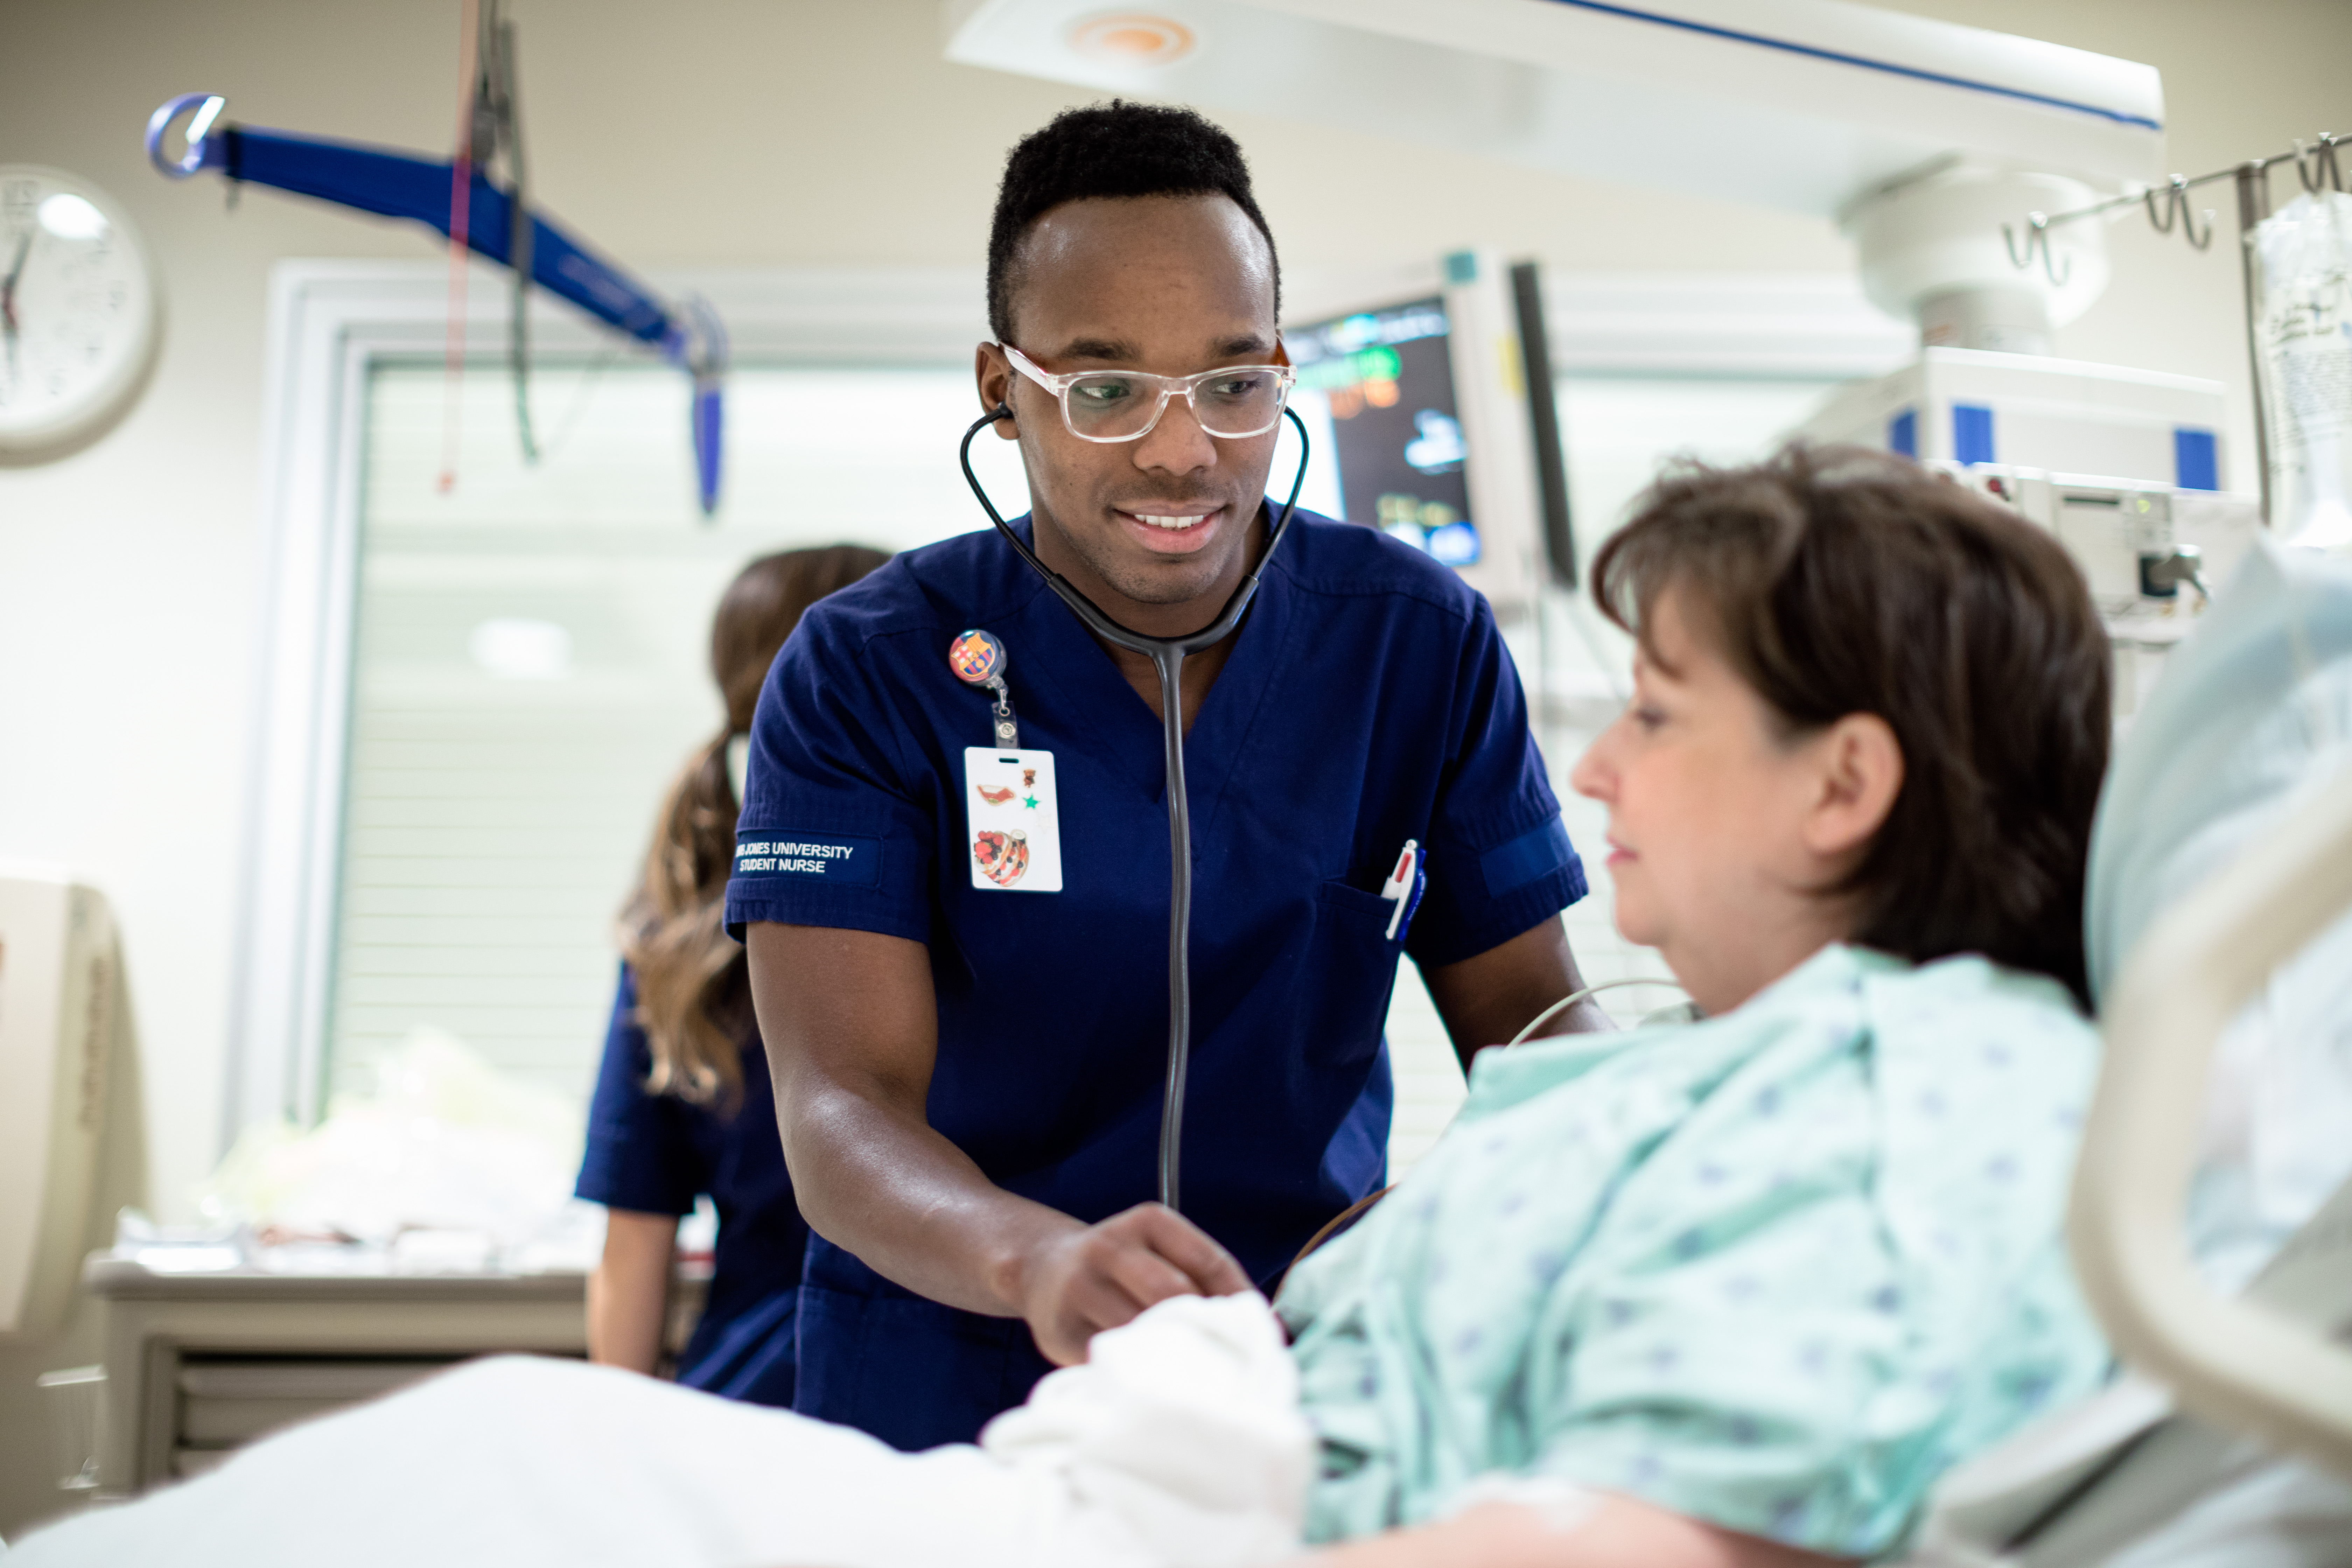 Clinical hours give nursing students hands-on experience in their field